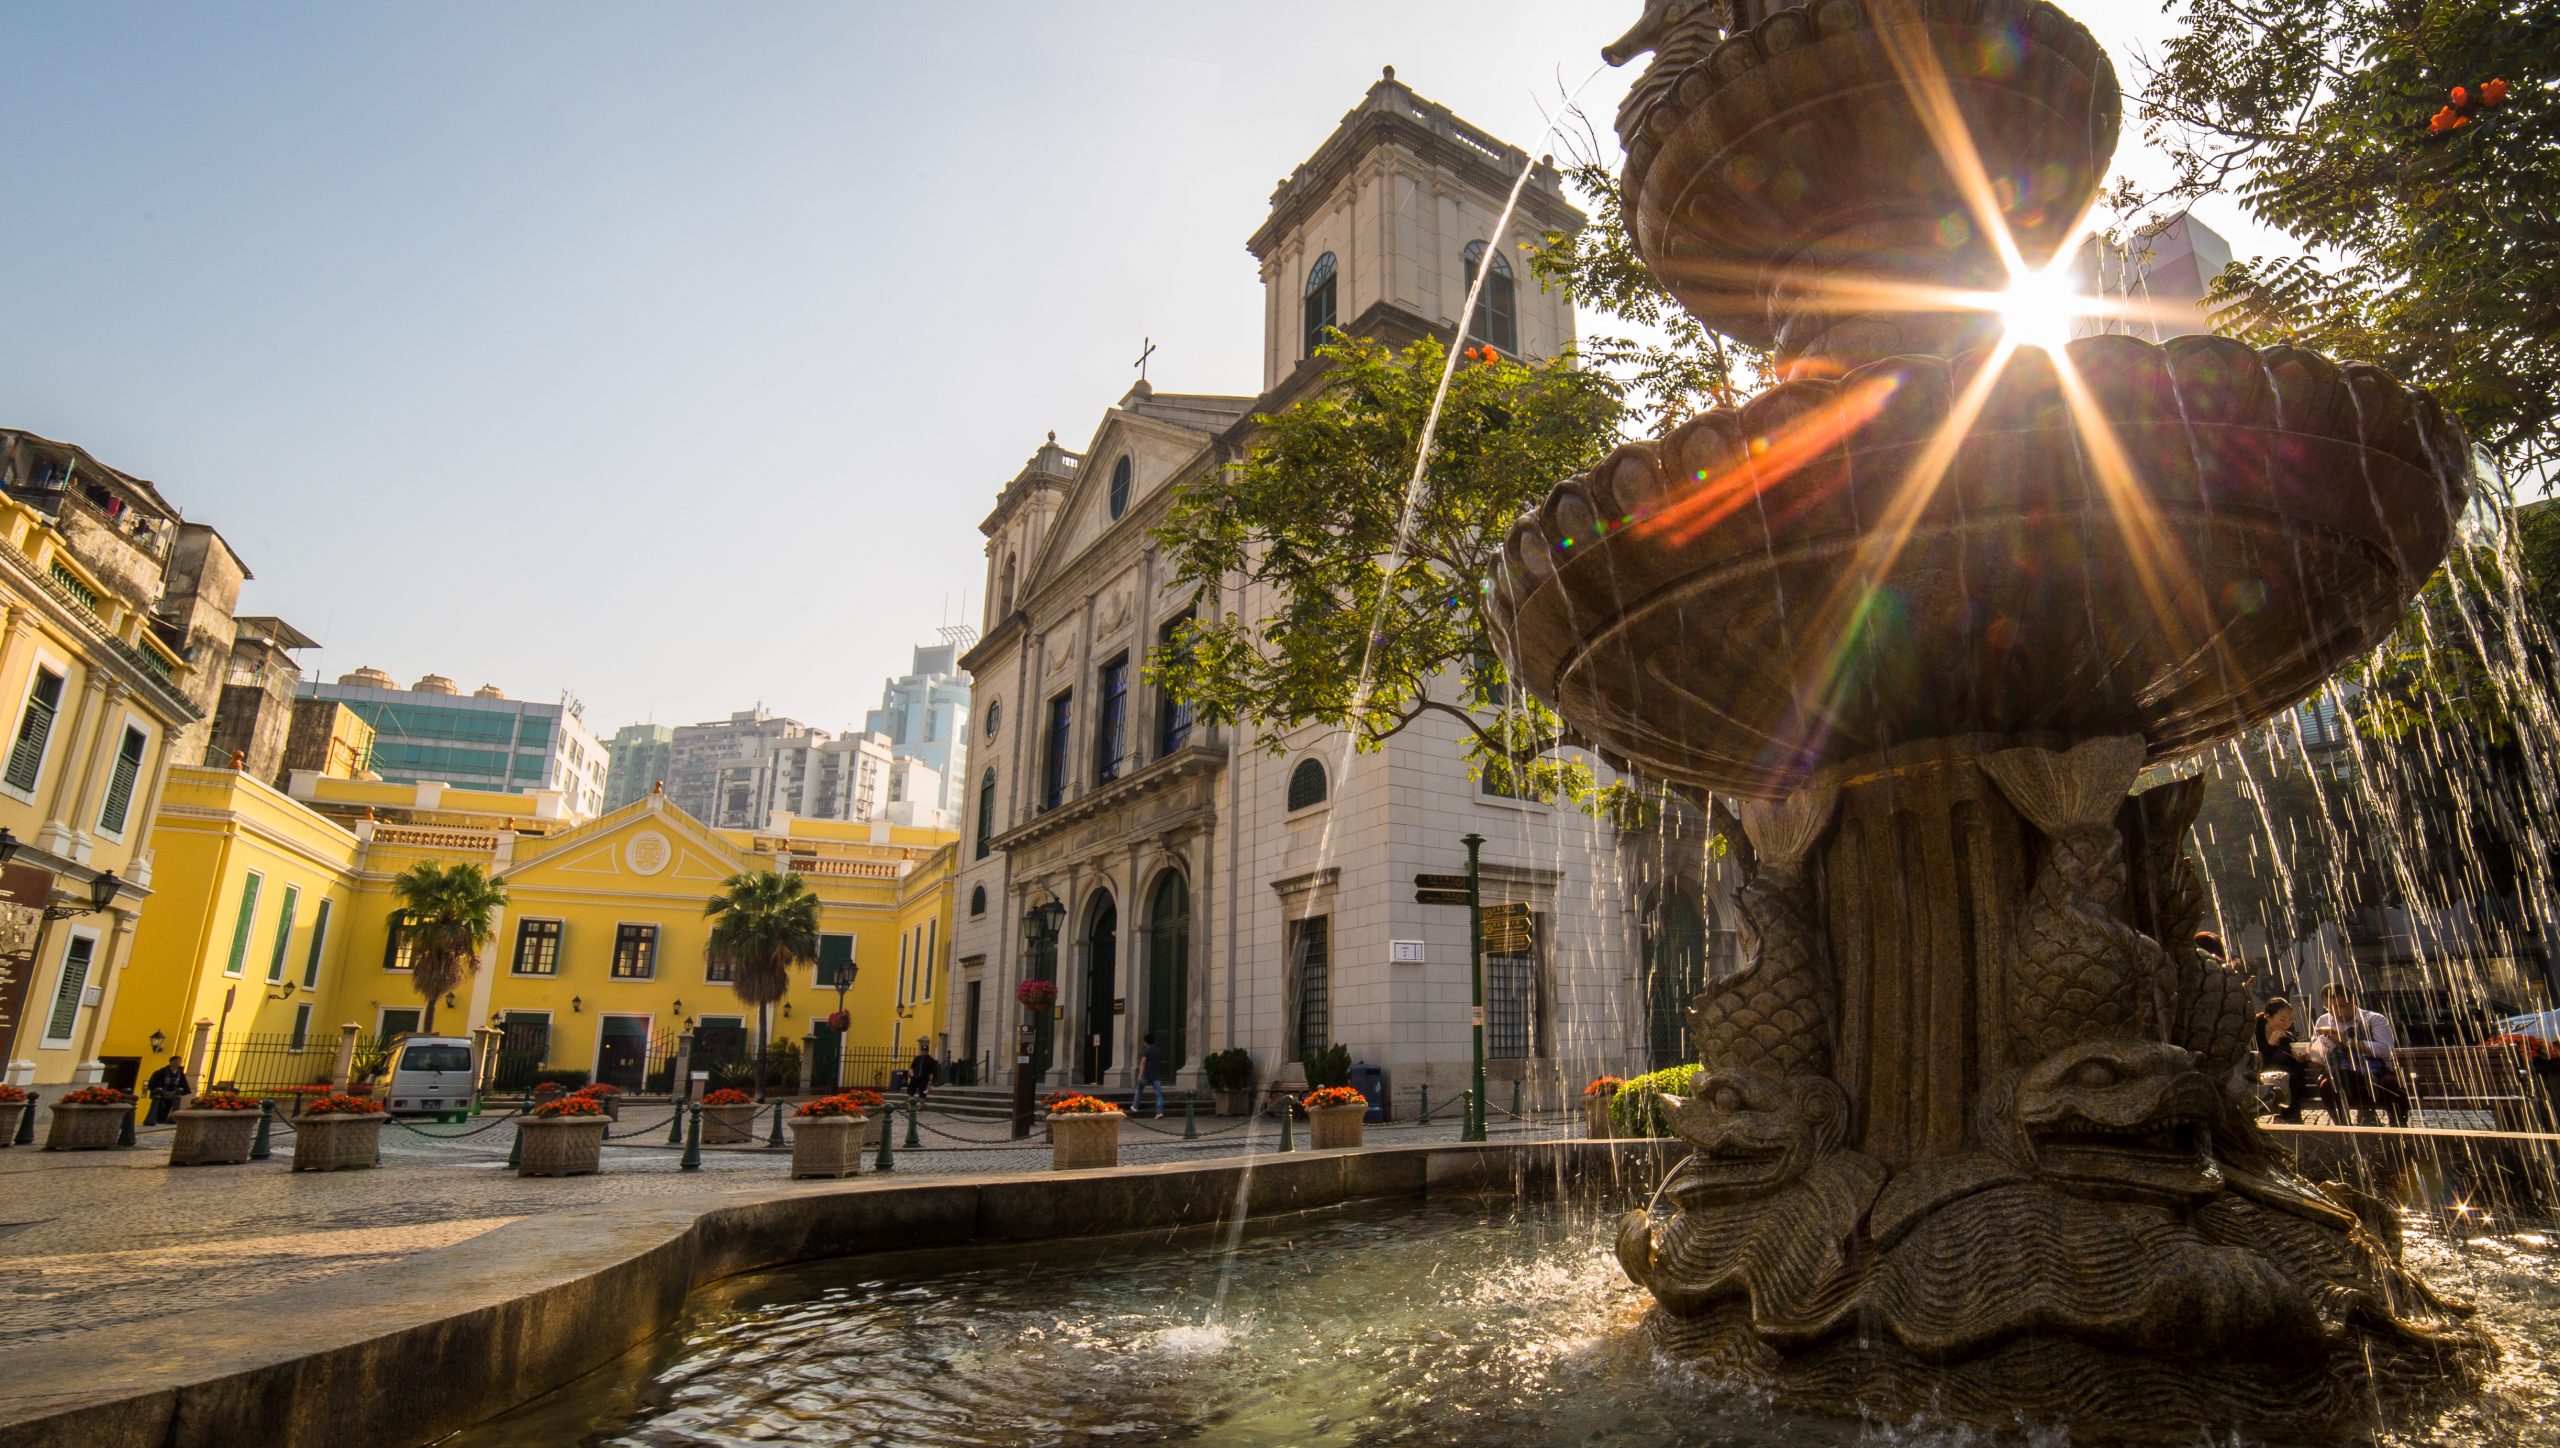 Long-time residents share their favourite spots in Macao